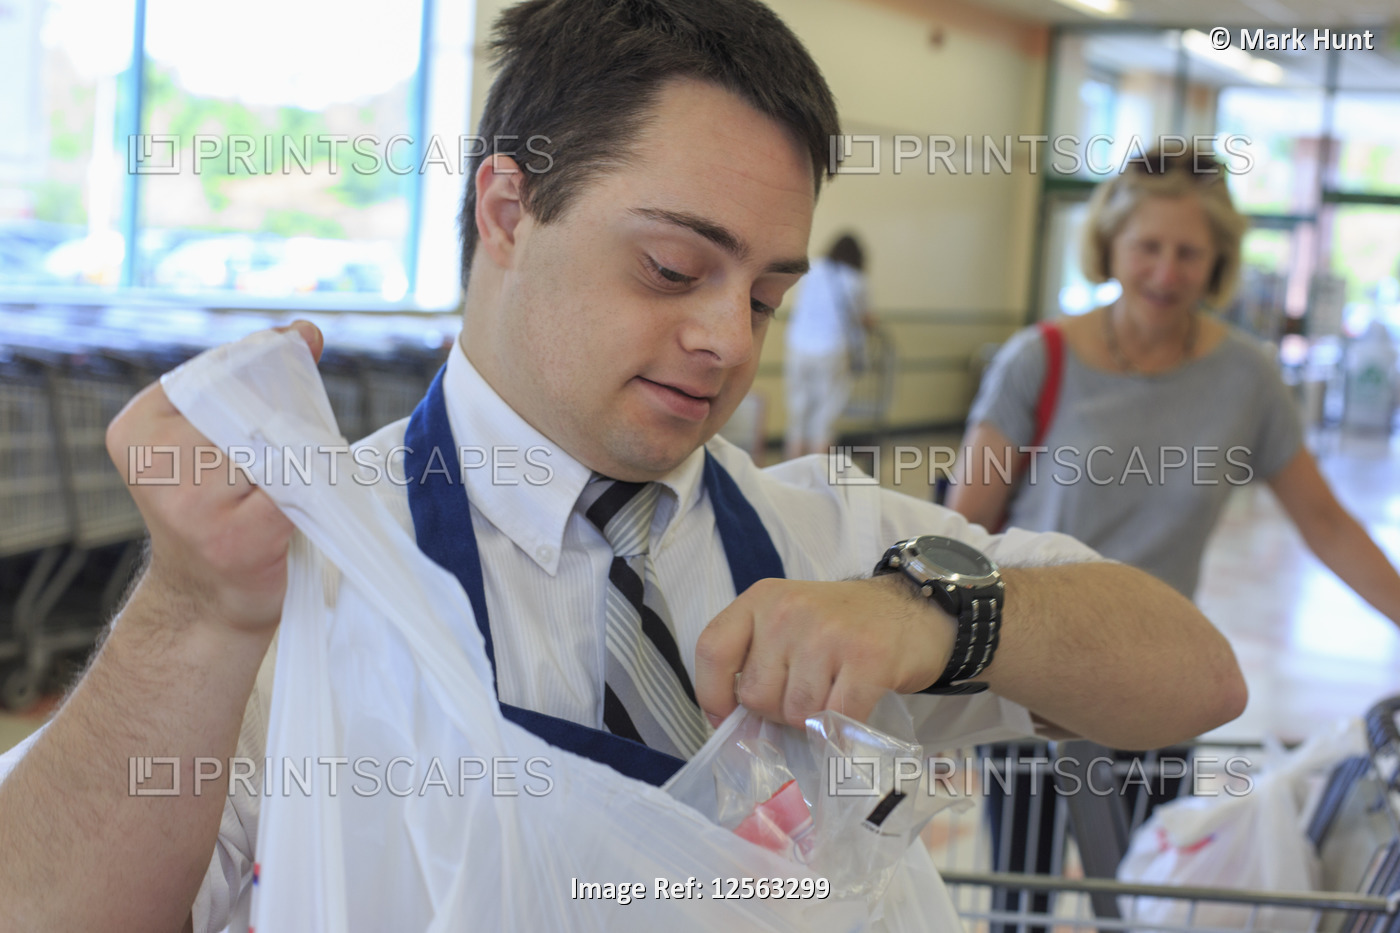 Man with Down Syndrome working at a grocery store with a customer